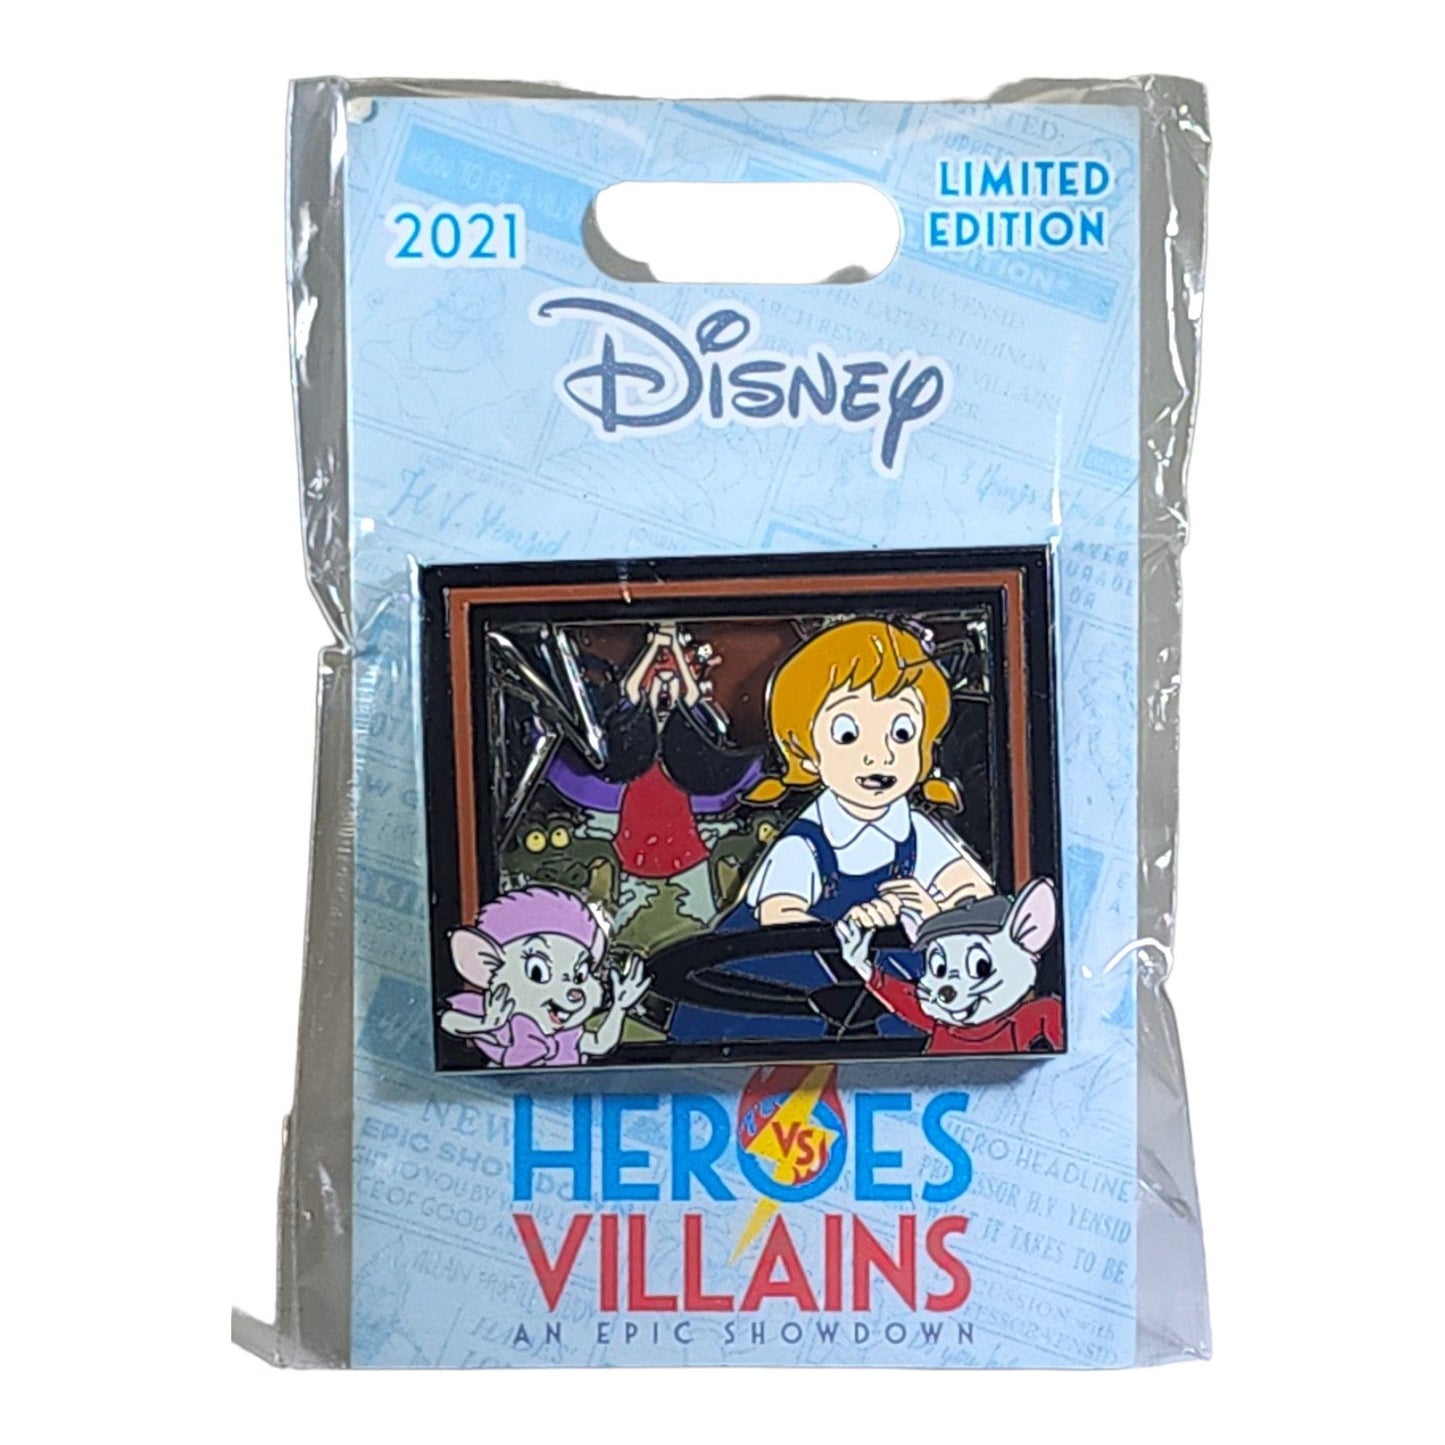 The Rescuers Multi-Plane Series - Heroes vs Villains Pin Event - Limited Edition 1000